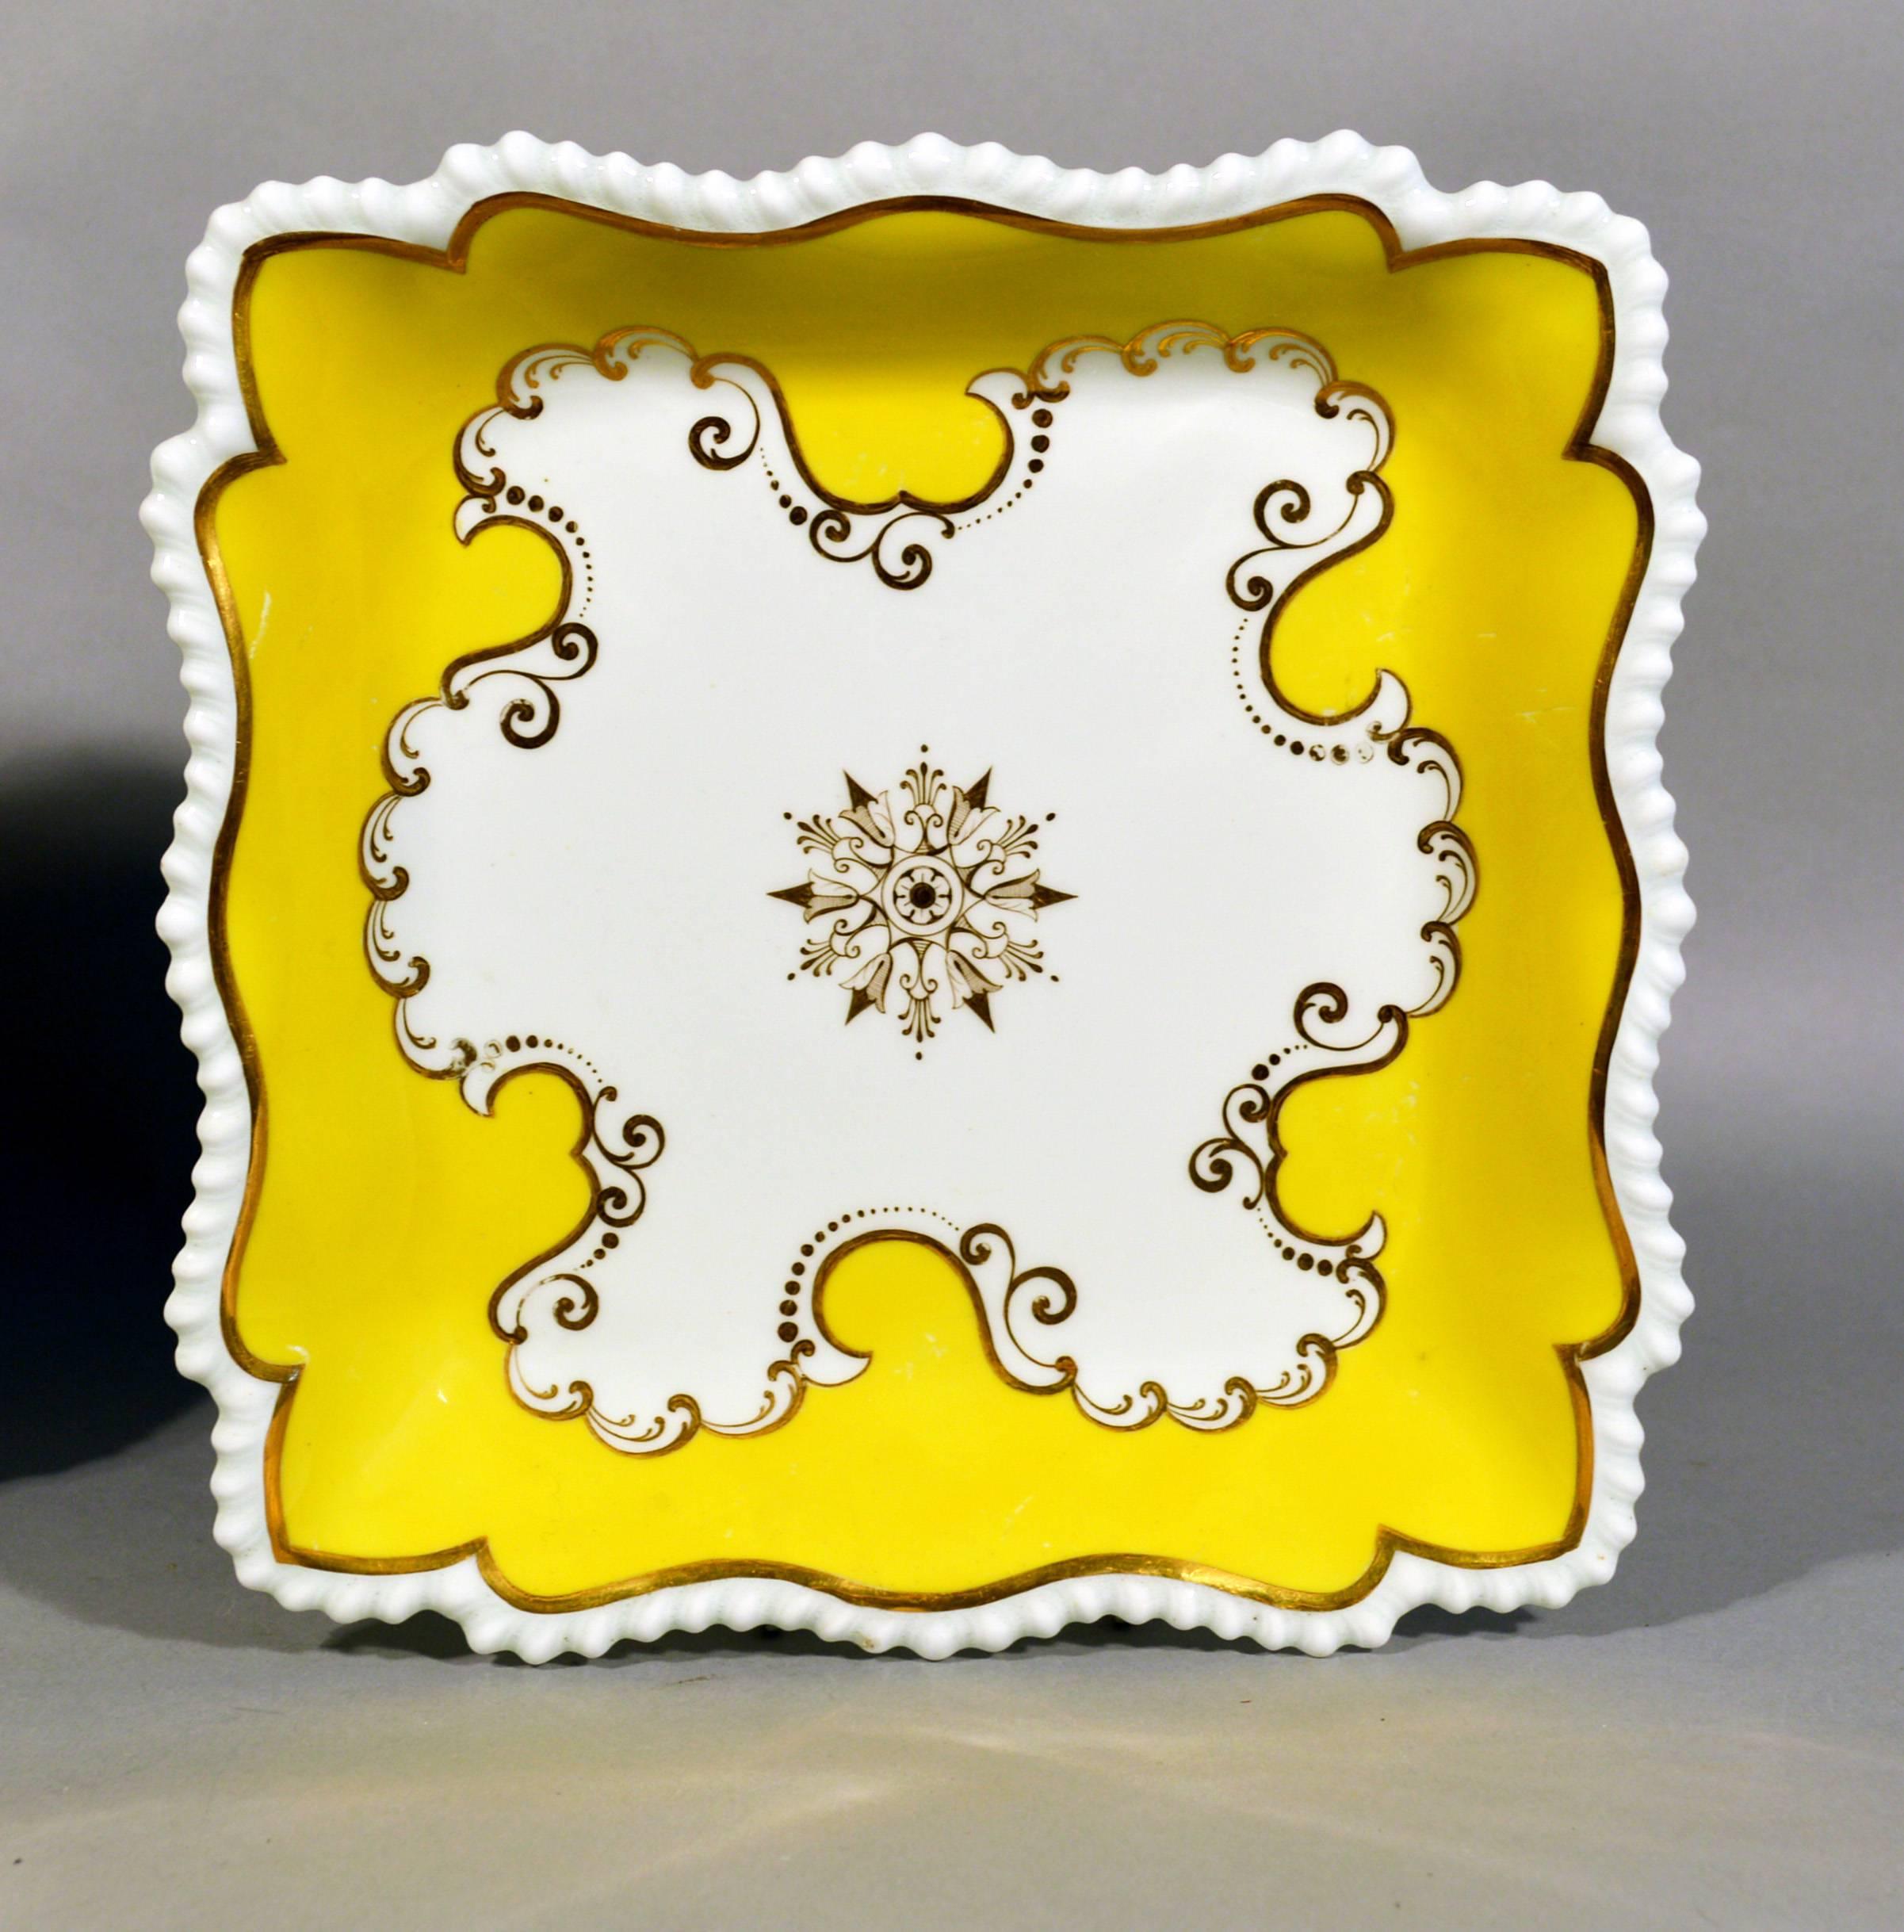 Flight, Barr & Barr Worcester yellow ground square porcelain dishes,
circa 1820.

The square porcelain dishes with an impressed FBB mark have a shaped, crimped border with a thin gilt band encircling the dish. The centre has a painted gilt star